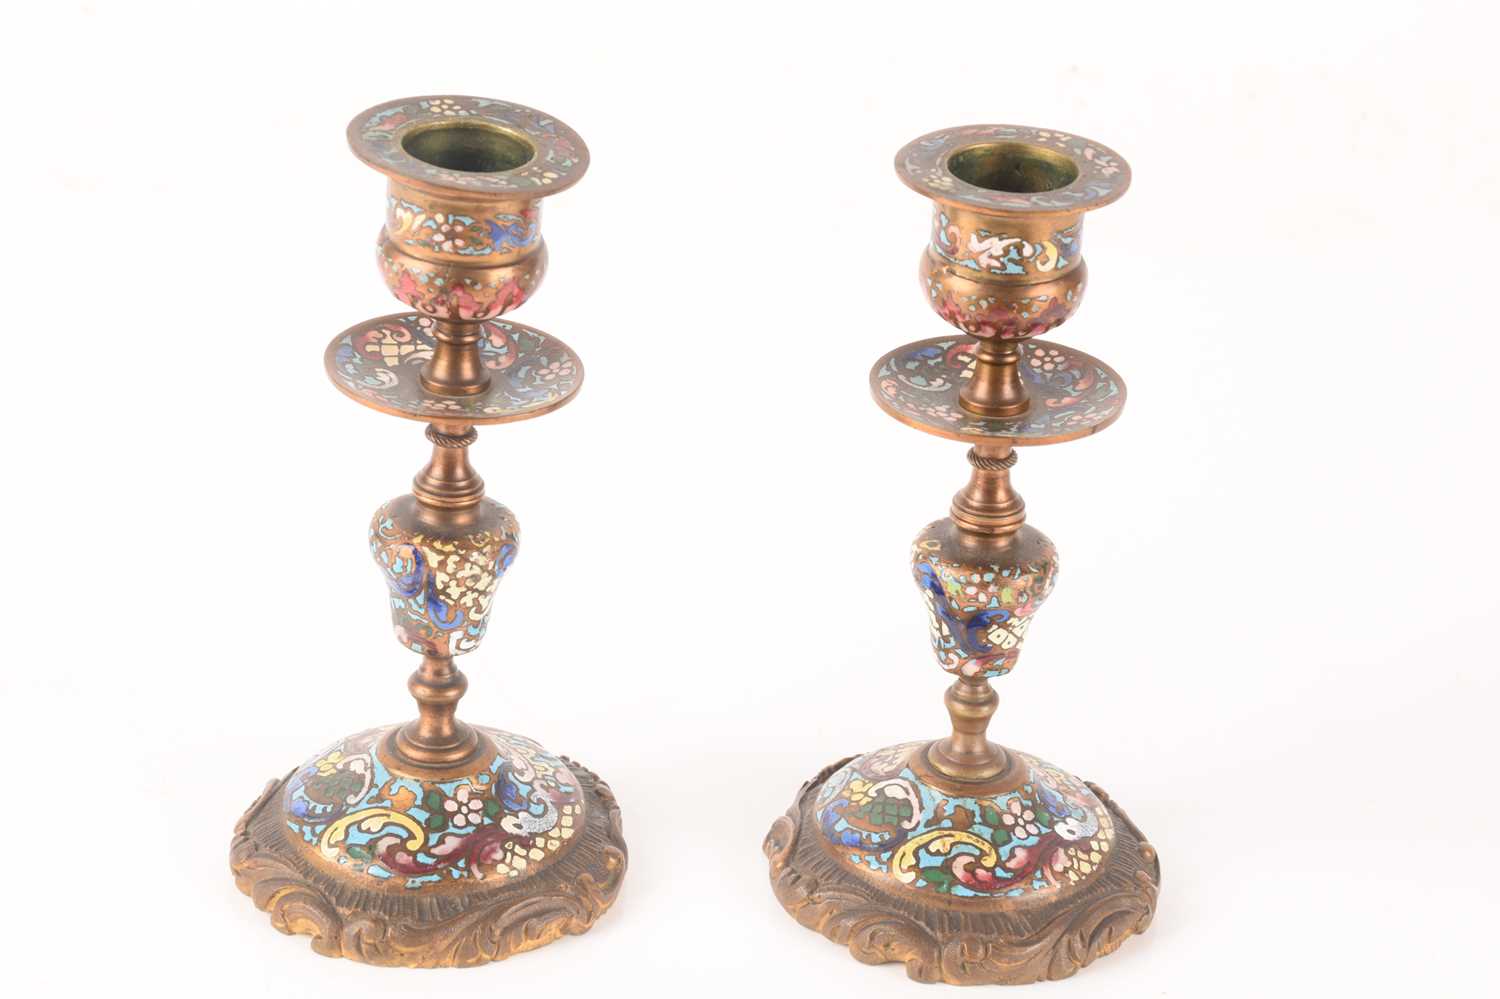 A late 19th-century French champléve enamel mantle clock with matching candlesticks, clock measures  - Image 13 of 16